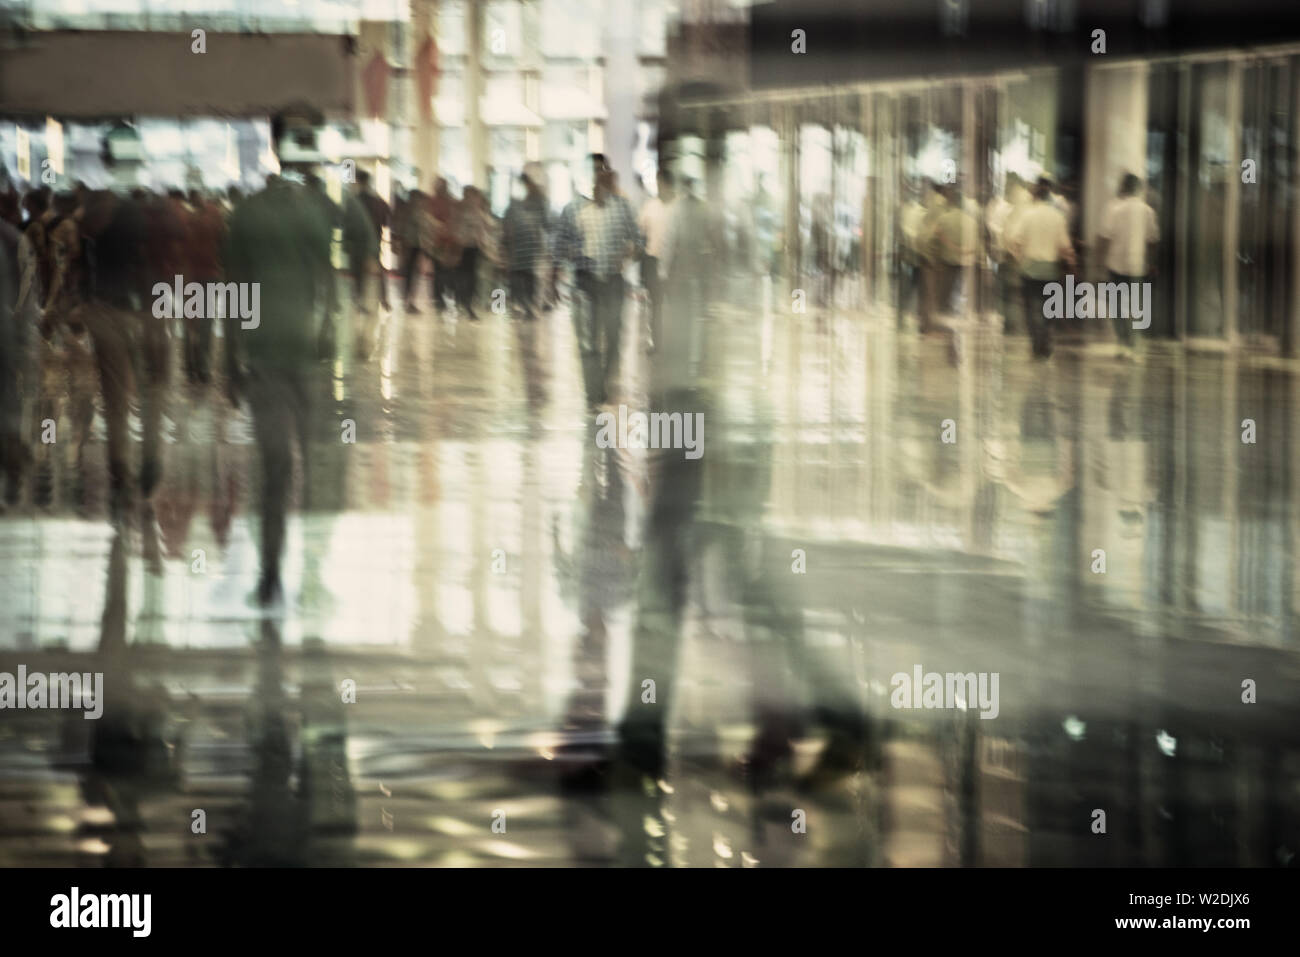 crowd of people walking shot through glass distorted glass Stock Photo